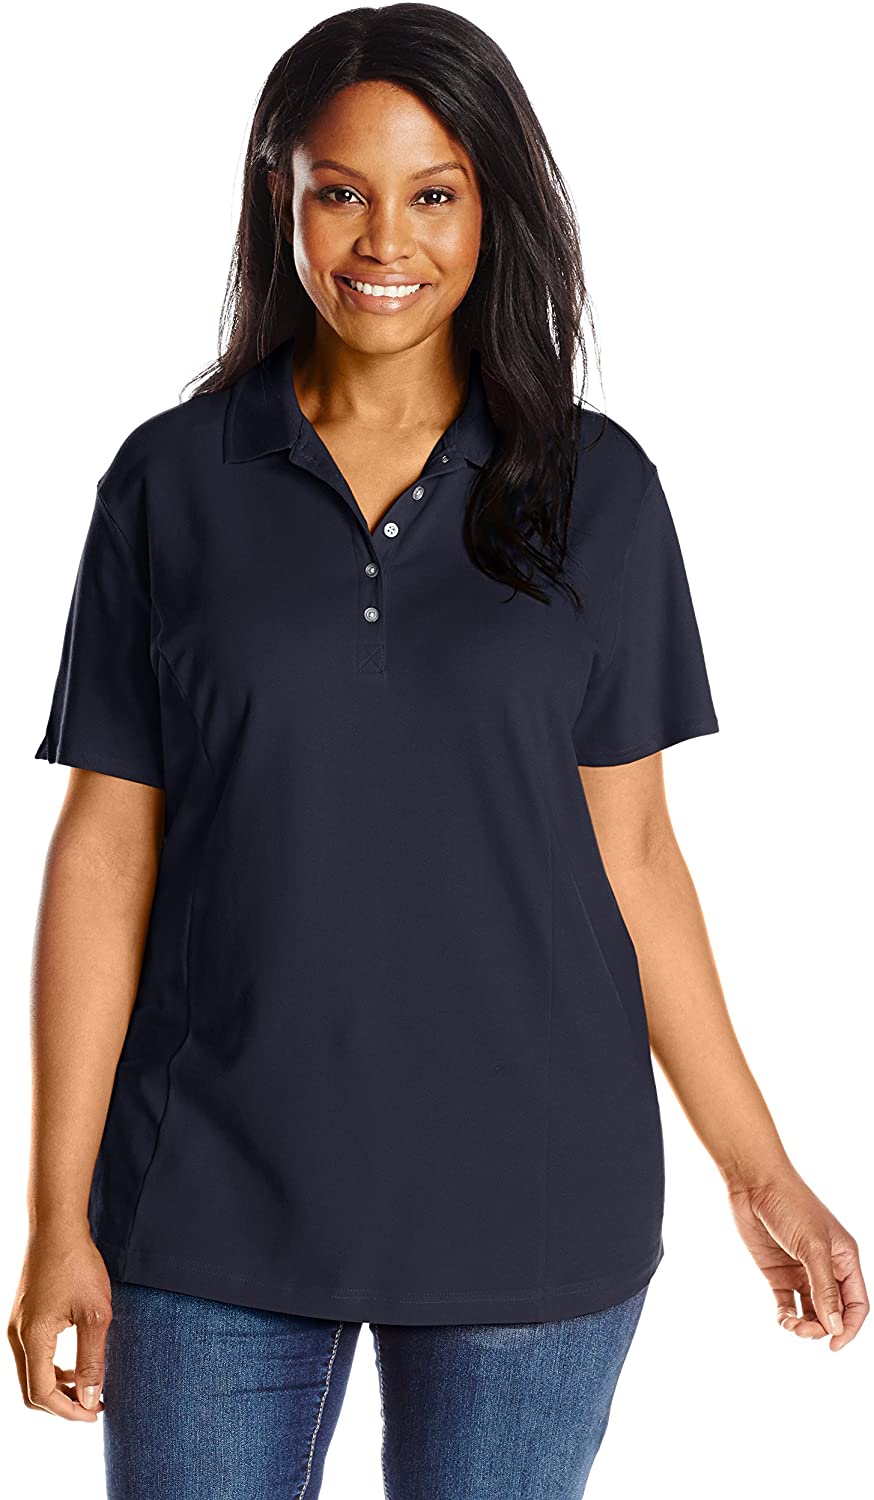 Price:$14.25 Riders by Lee Indigo Women’s Plus Size Morgan Short Sleeve Polo Shirt at Amazon Women’s Clothing store